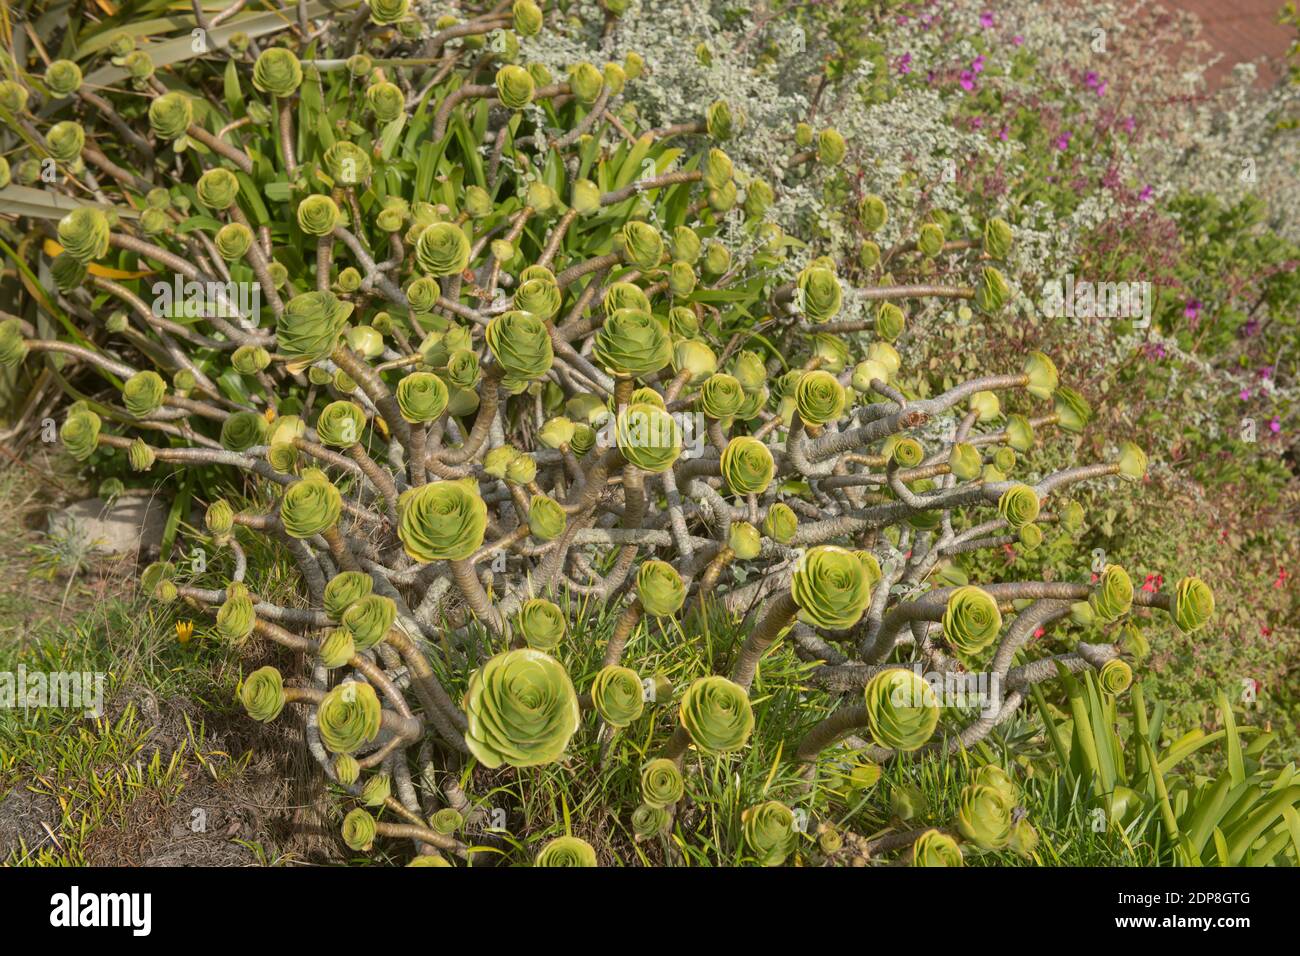 Group of Wild Succulent Evergreen Aeonium Saucer Plants (Aeonium undulatum) Growing in a Roadside Verge on the Island of Tresco in the Isles of Scilly Stock Photo